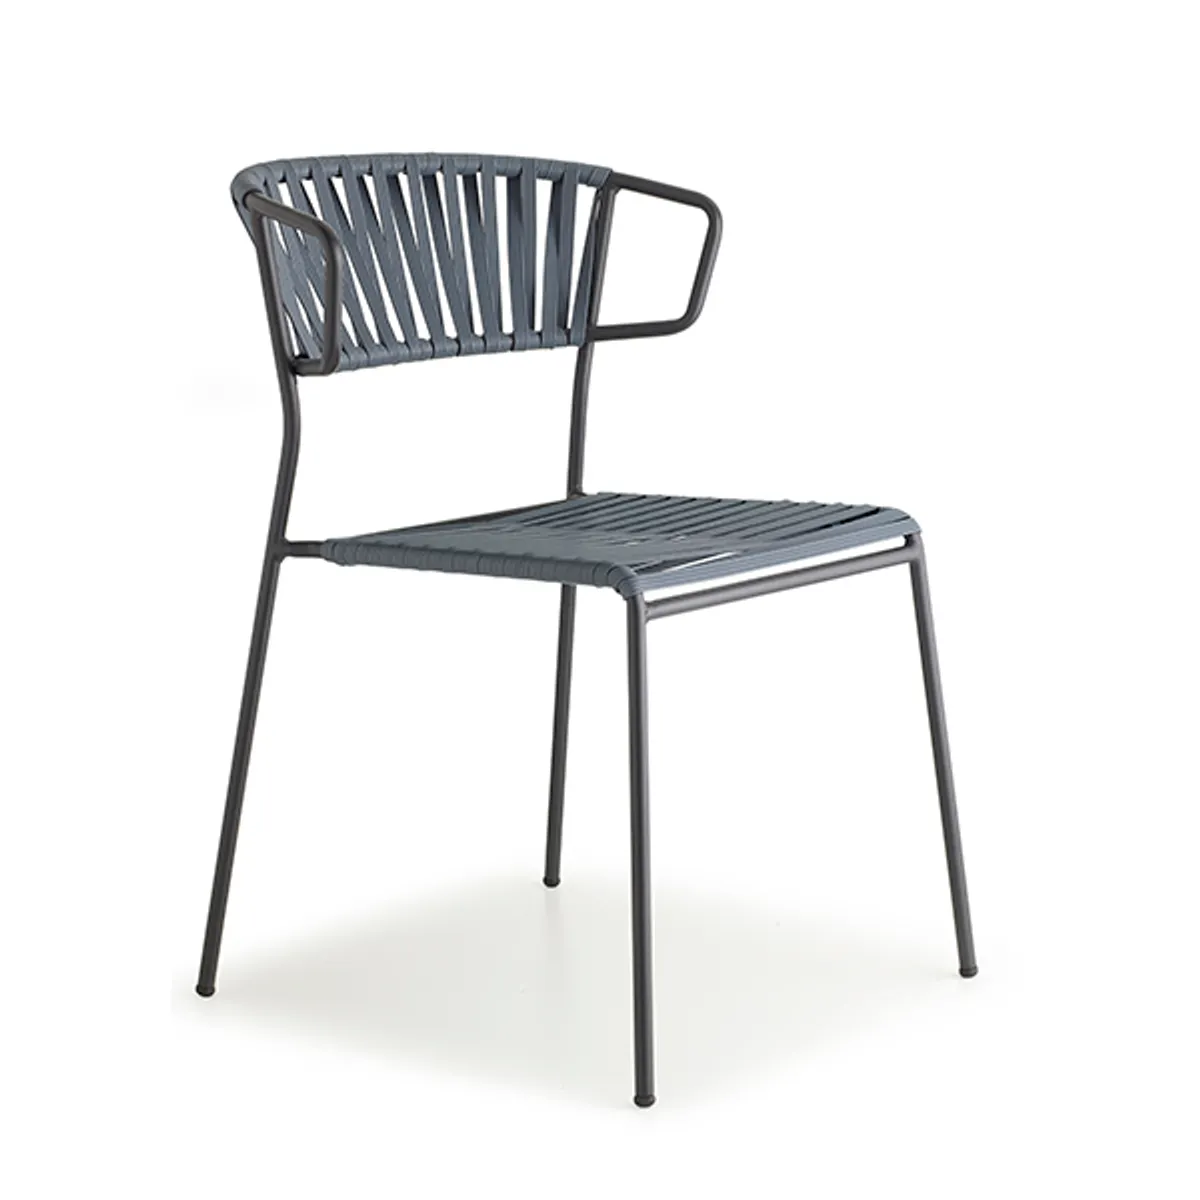 Robyn Pvc Exterior Armchair For Commercial Use Inside Out Contracts 026